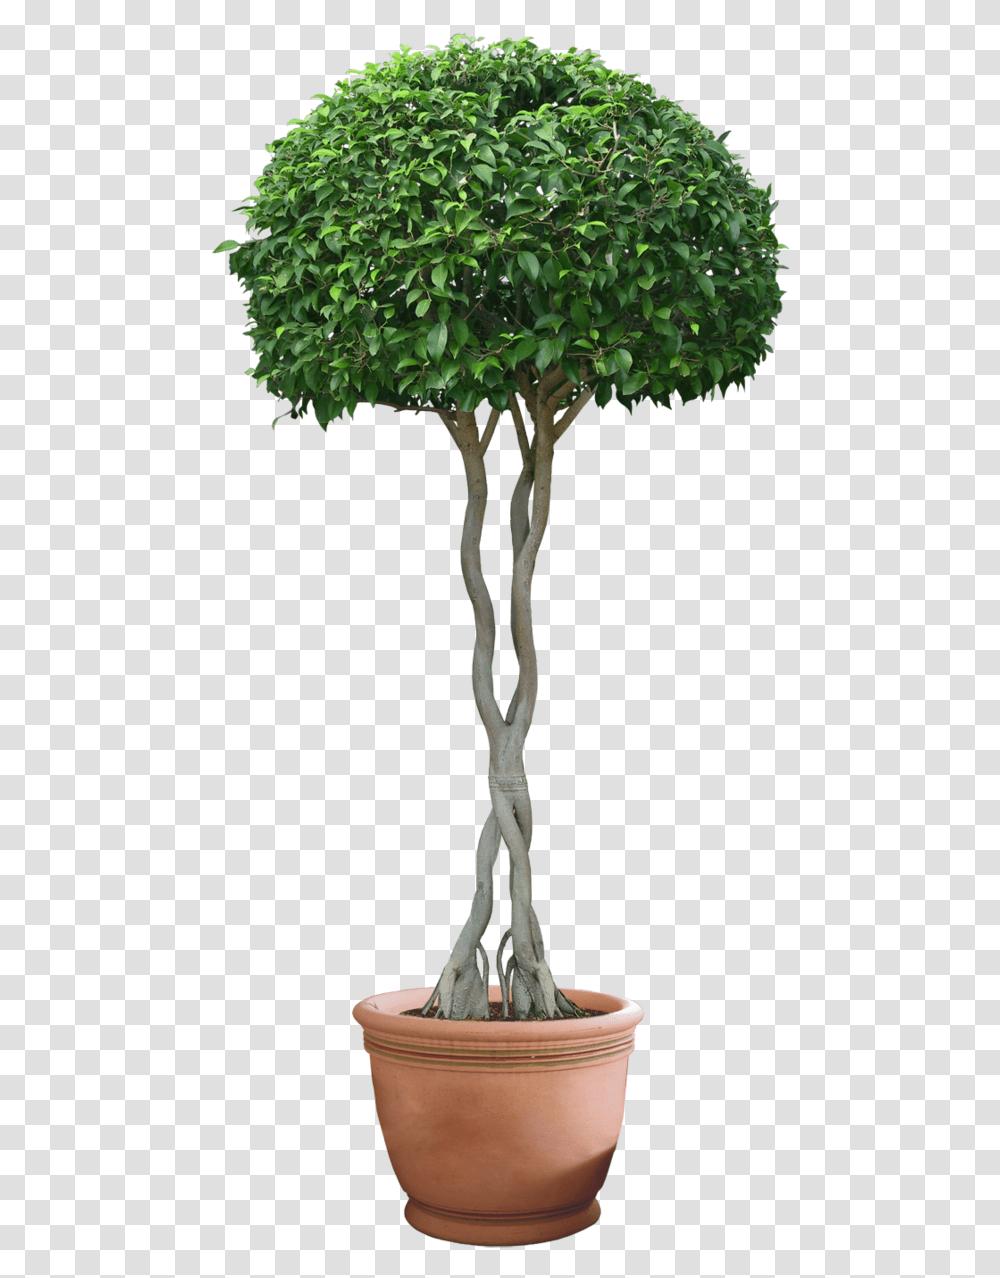 Woody Plant Plant, Tree, Leaf, Lamp, Tree Trunk Transparent Png